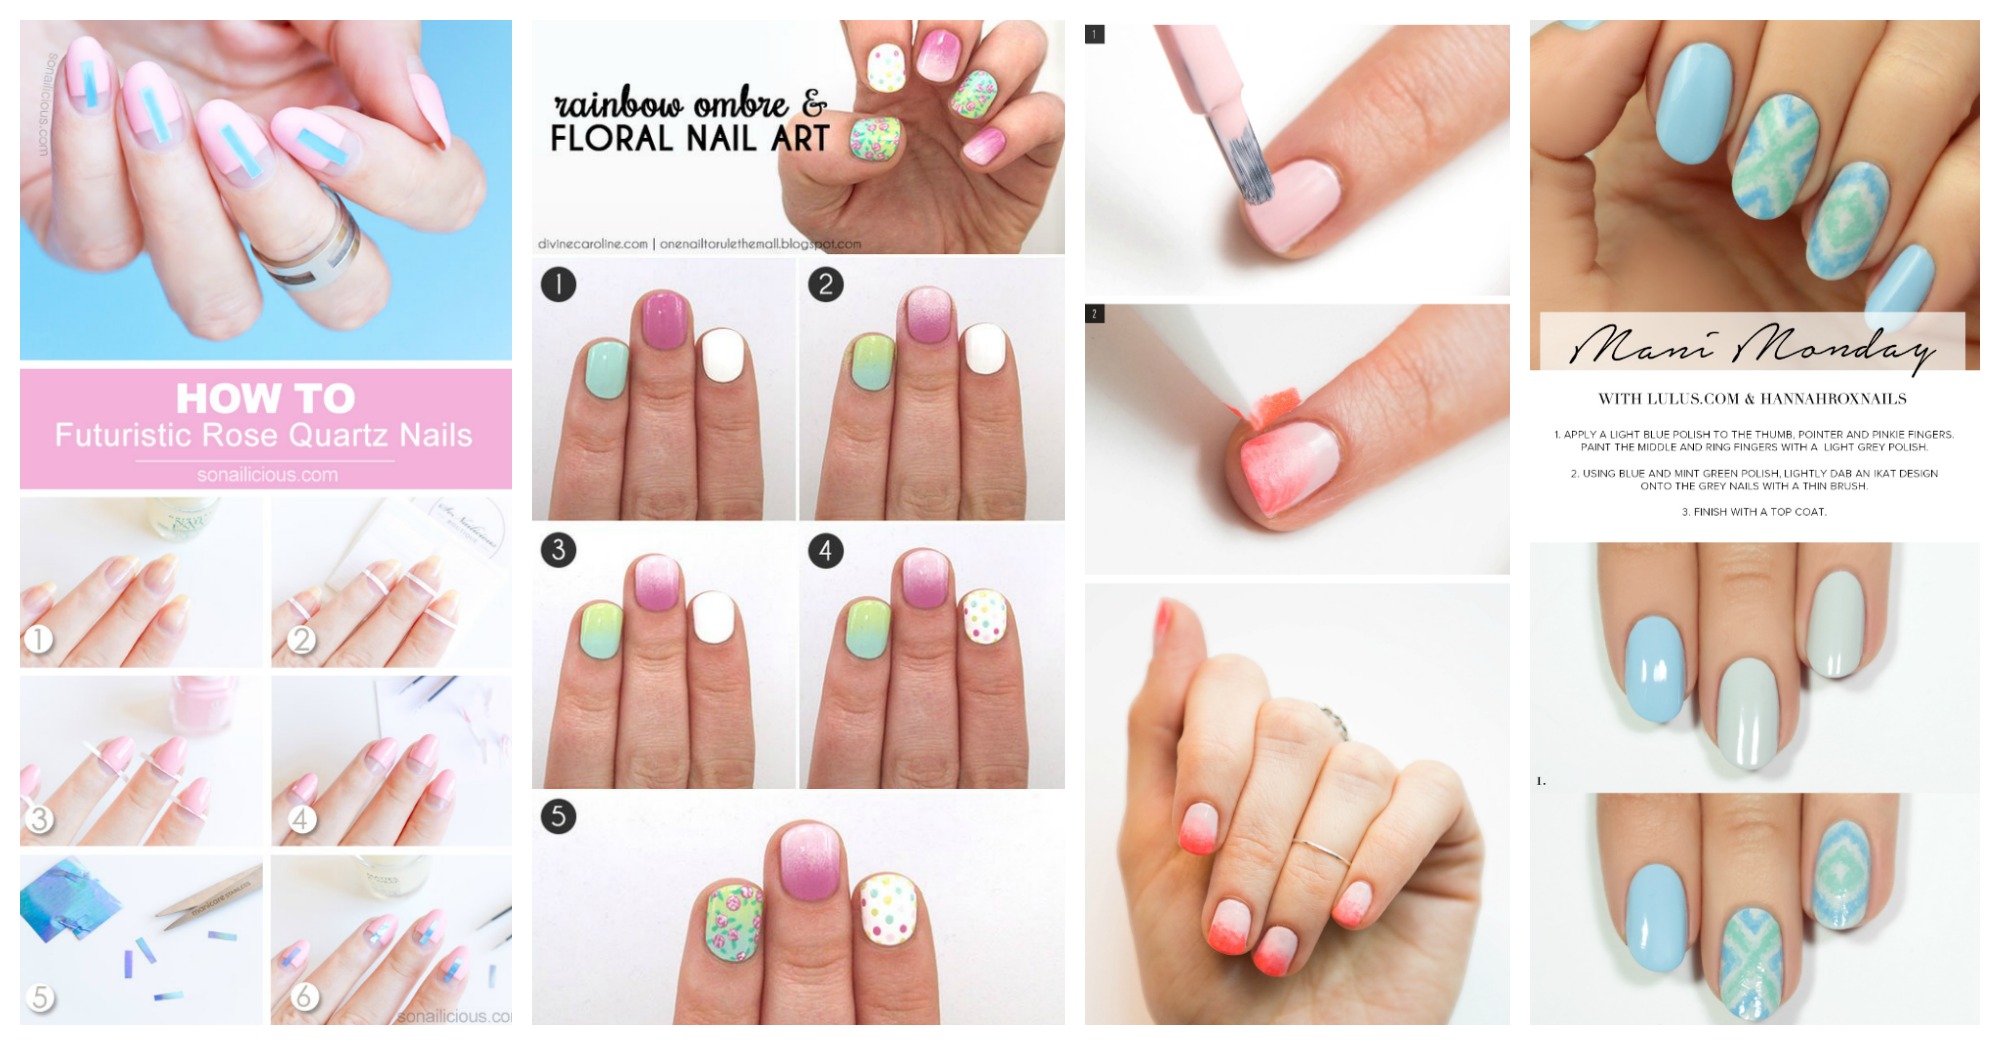 3. Step-by-Step Nail Art Tutorials - wide 3